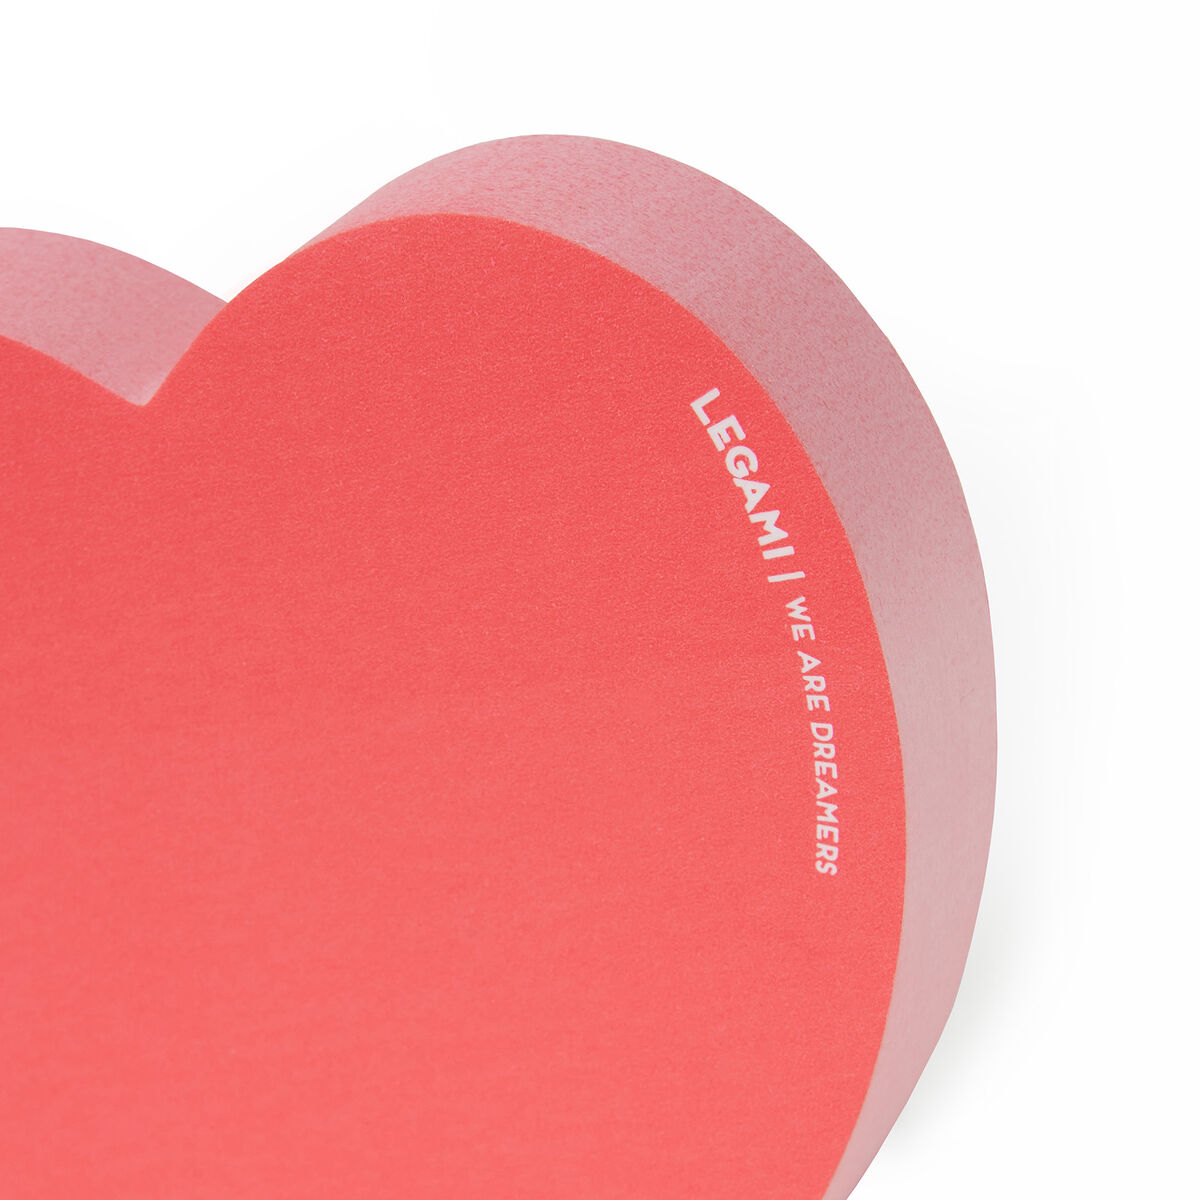 Back to School | Legami Adhesive Notepad Heart by Weirs of Baggot St